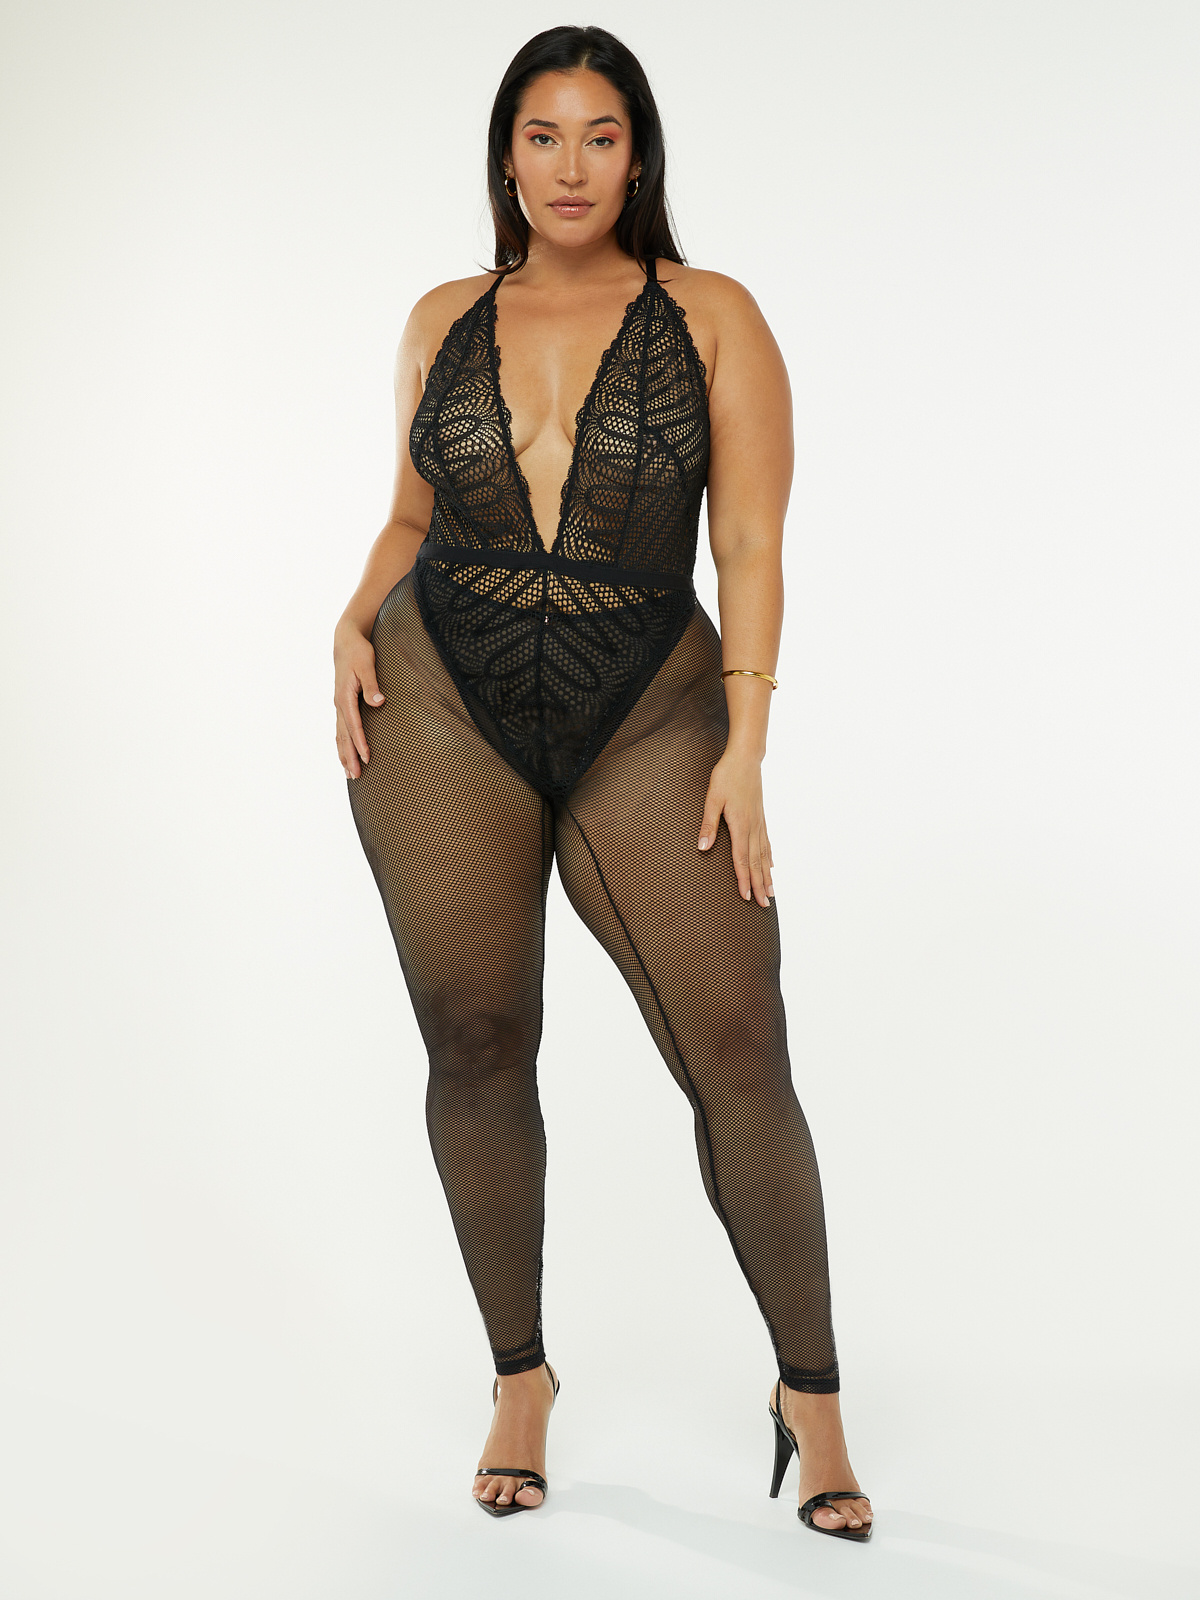 Stranded In Lace Crochet Catsuit